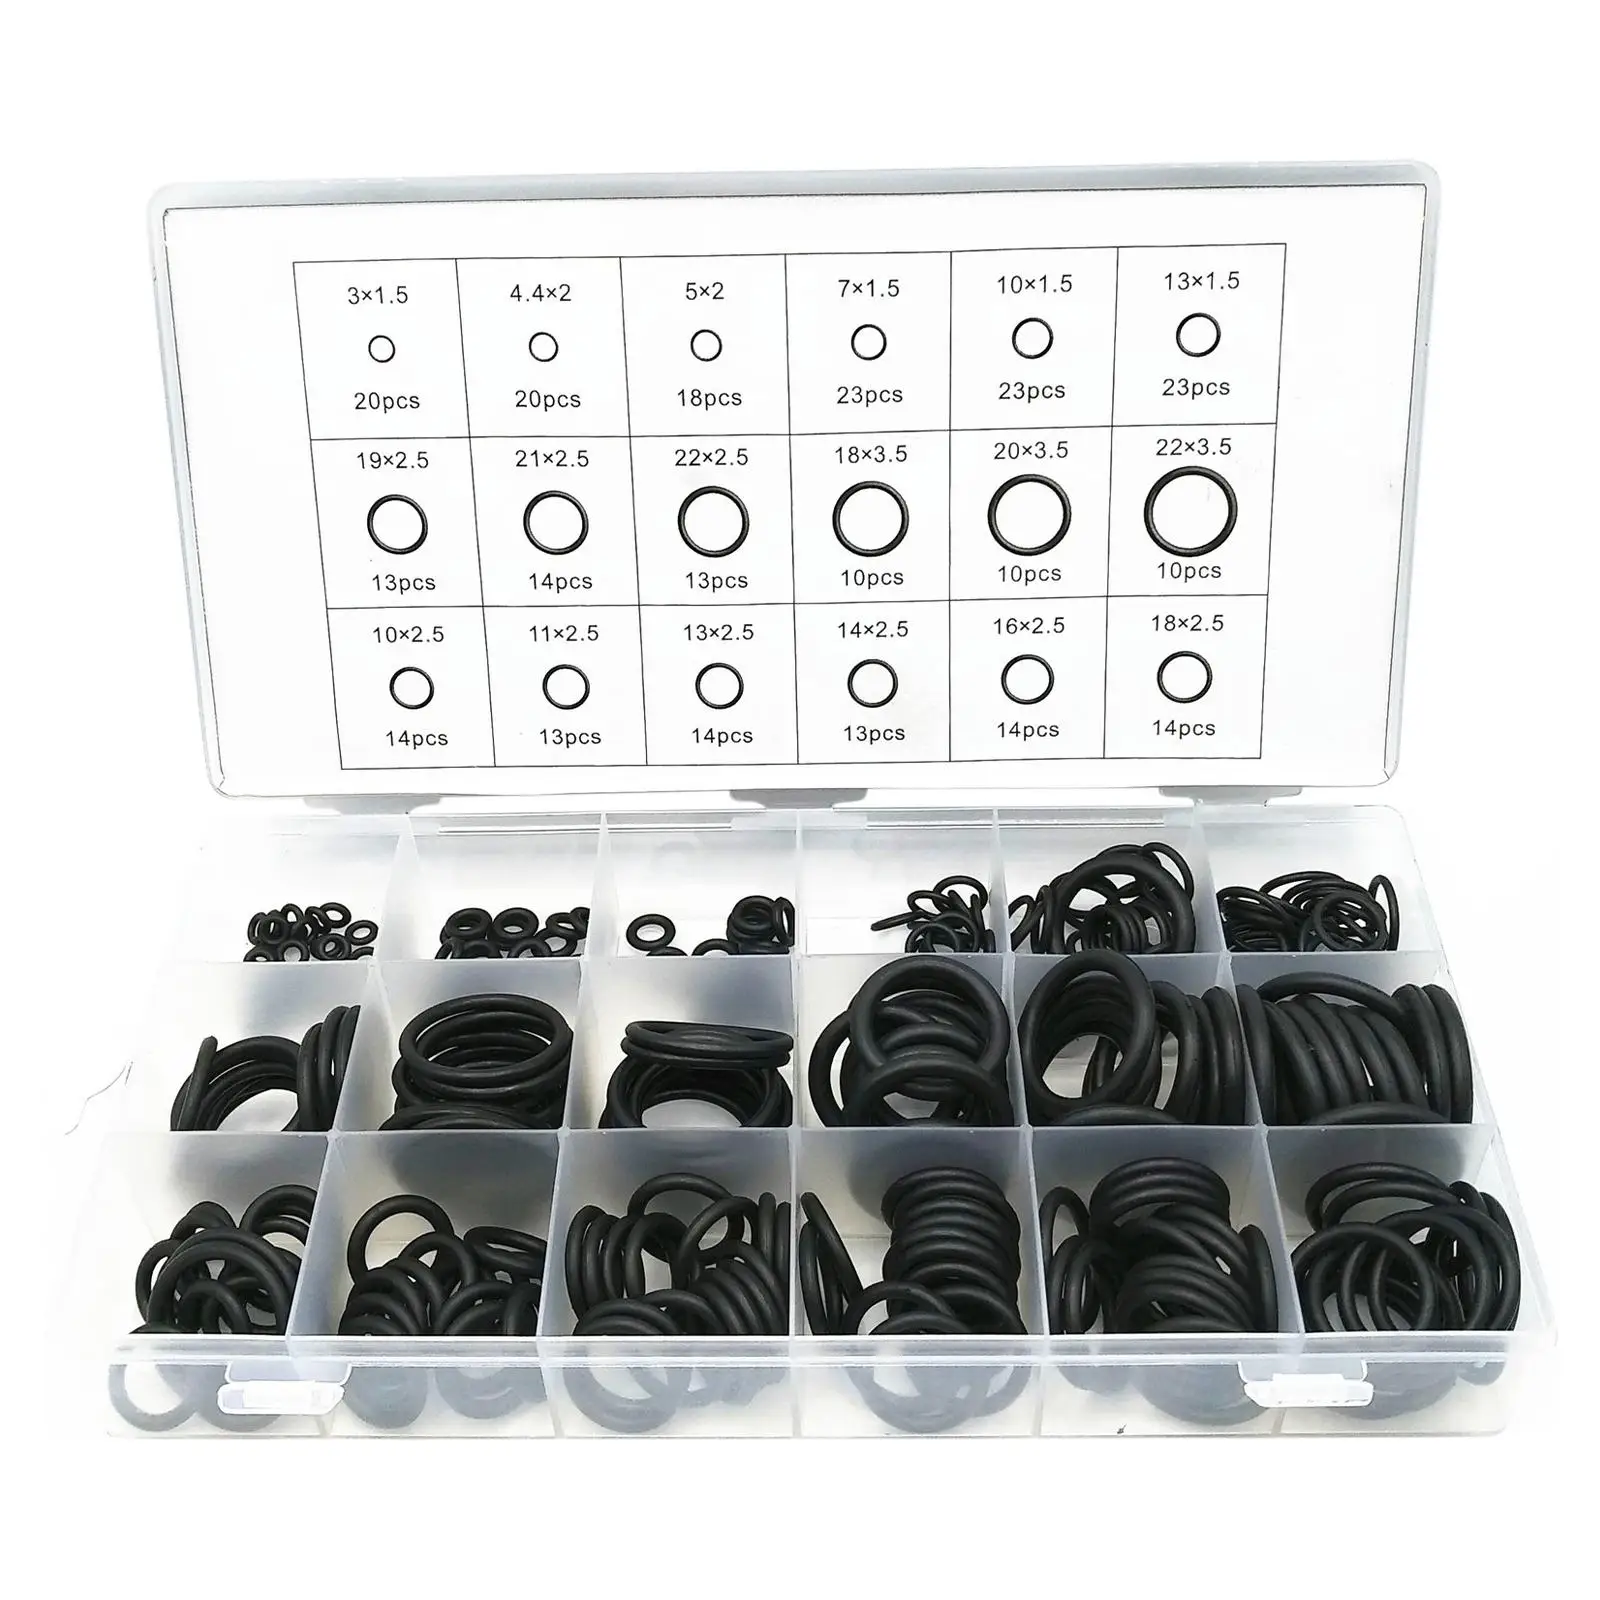 279 Pieces Rubber O Ring Assortment Kit 18 Different Sizes Electrical Wire Gasket Washer Set Round Fit for Automobiles Plumbing